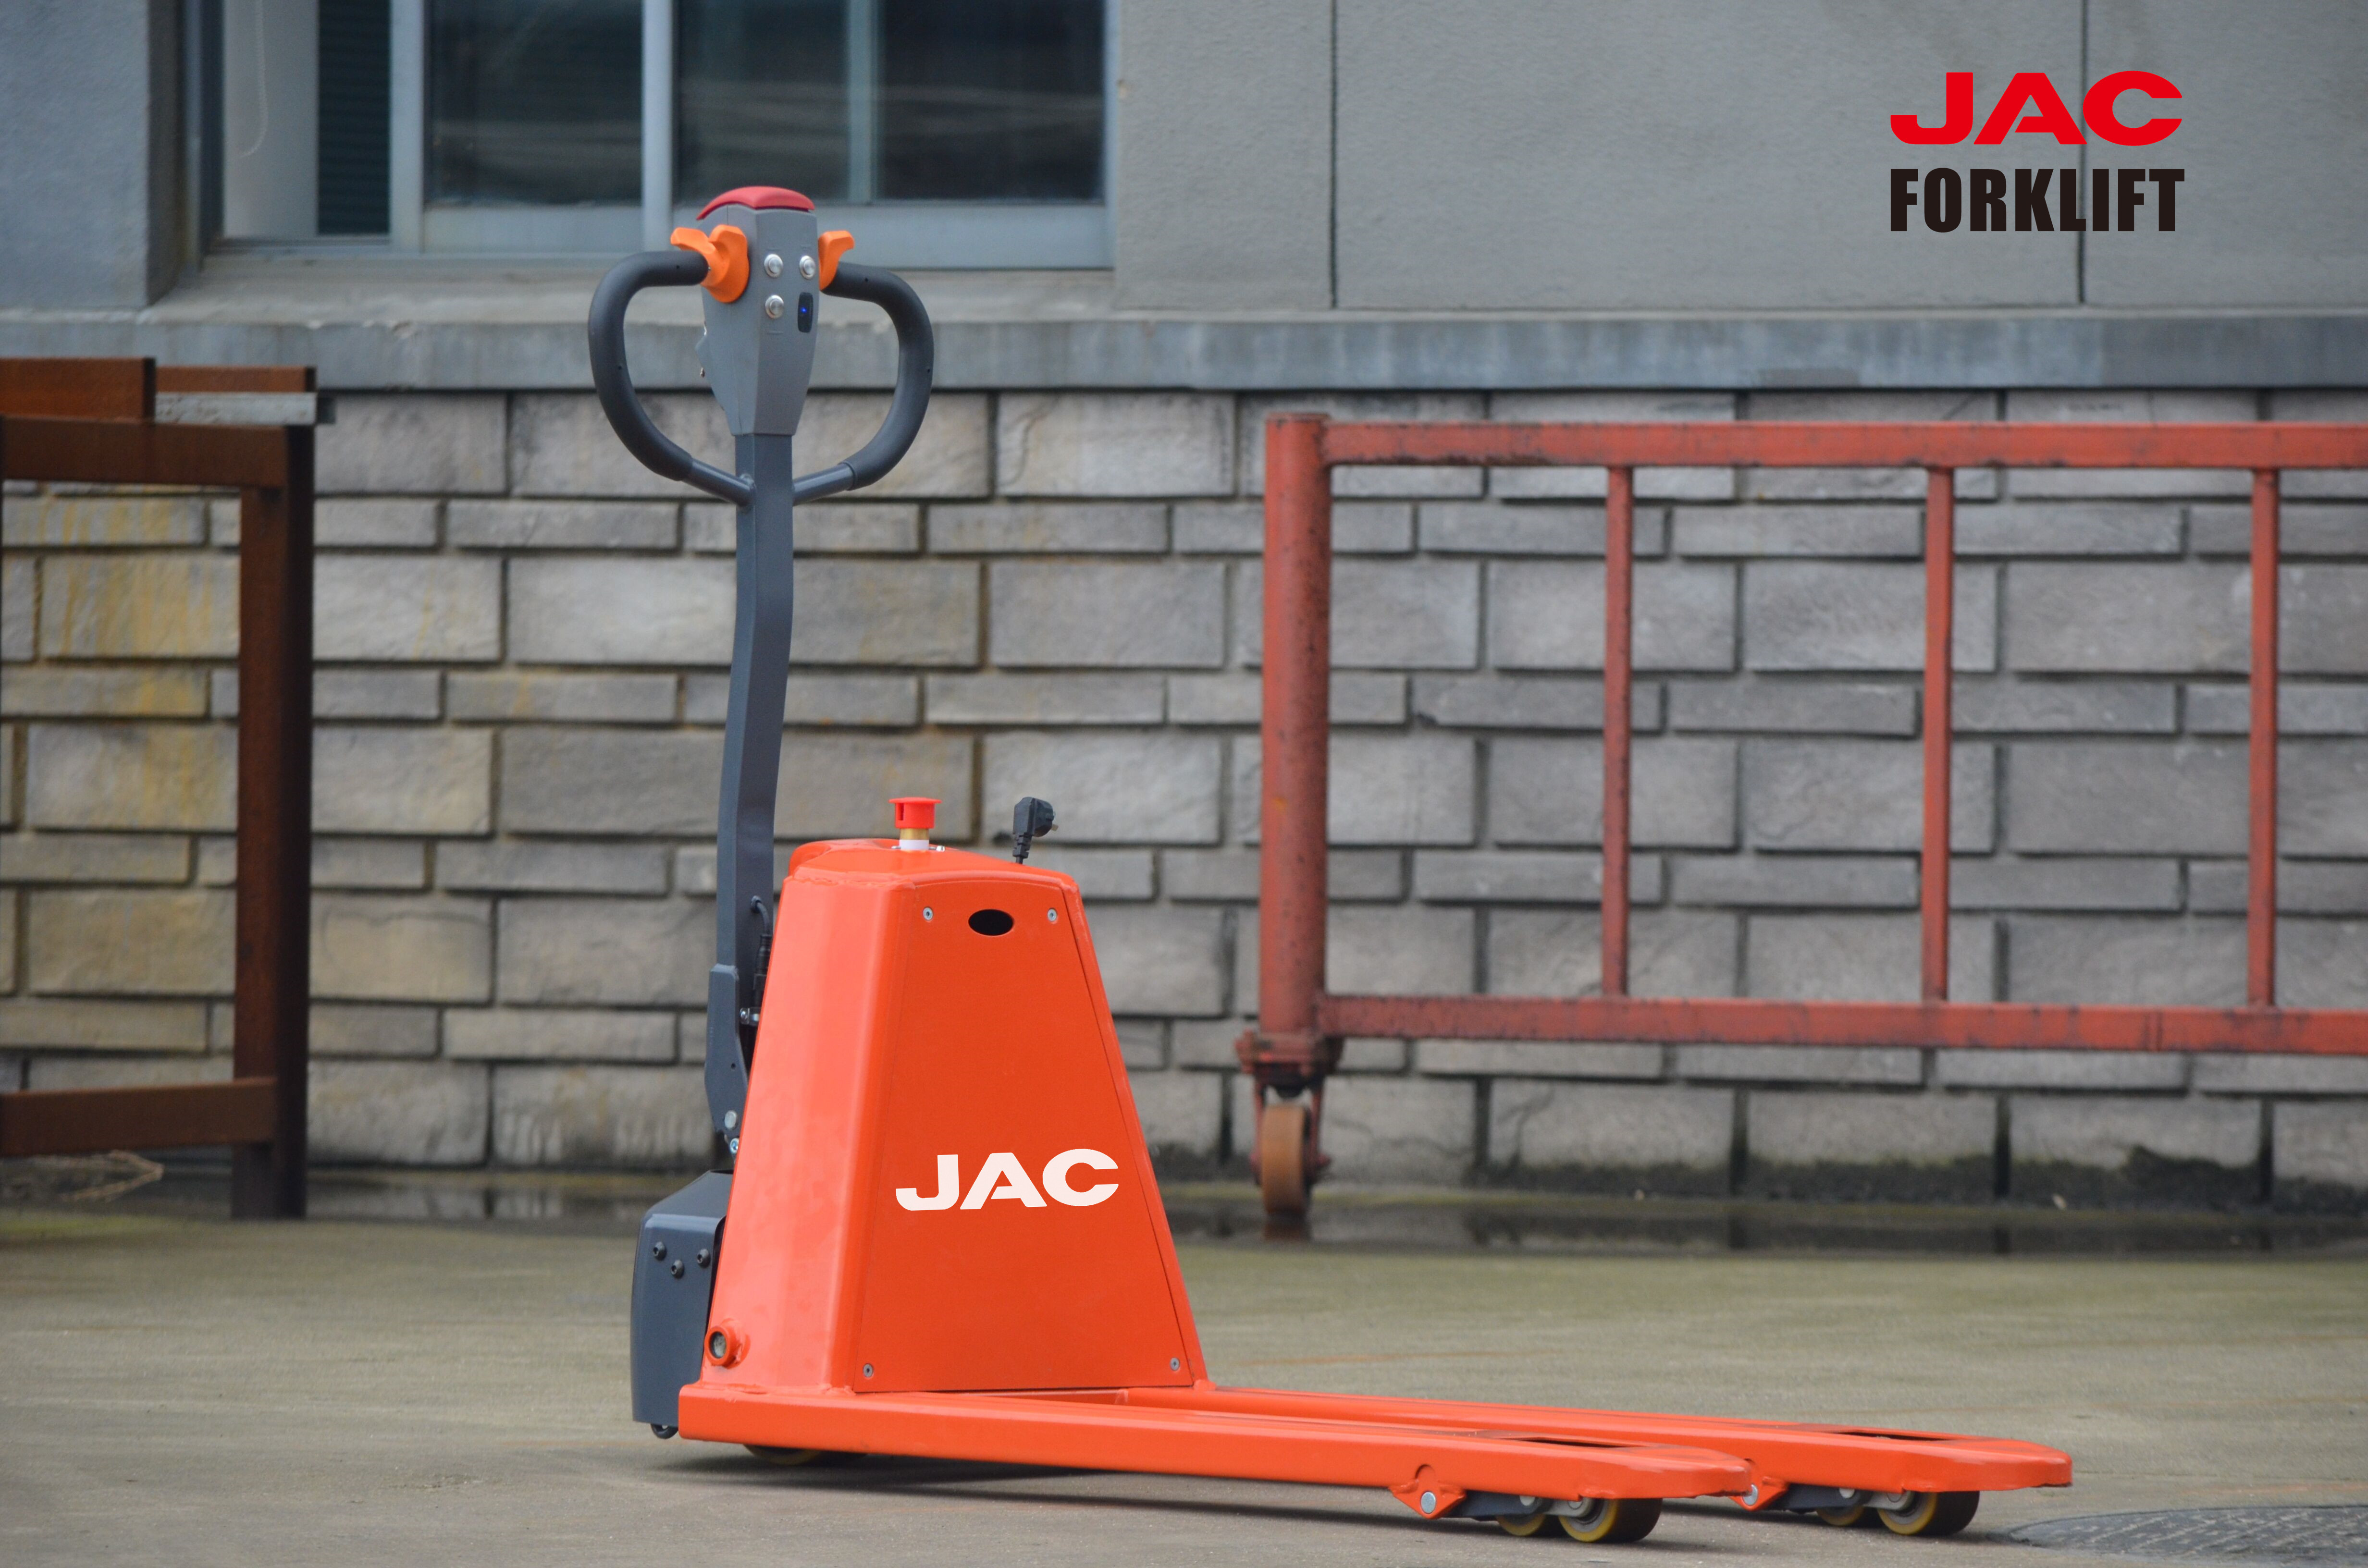 China 1.7T Warehouse Electric Pallet Truck stacker 1700kg on sale